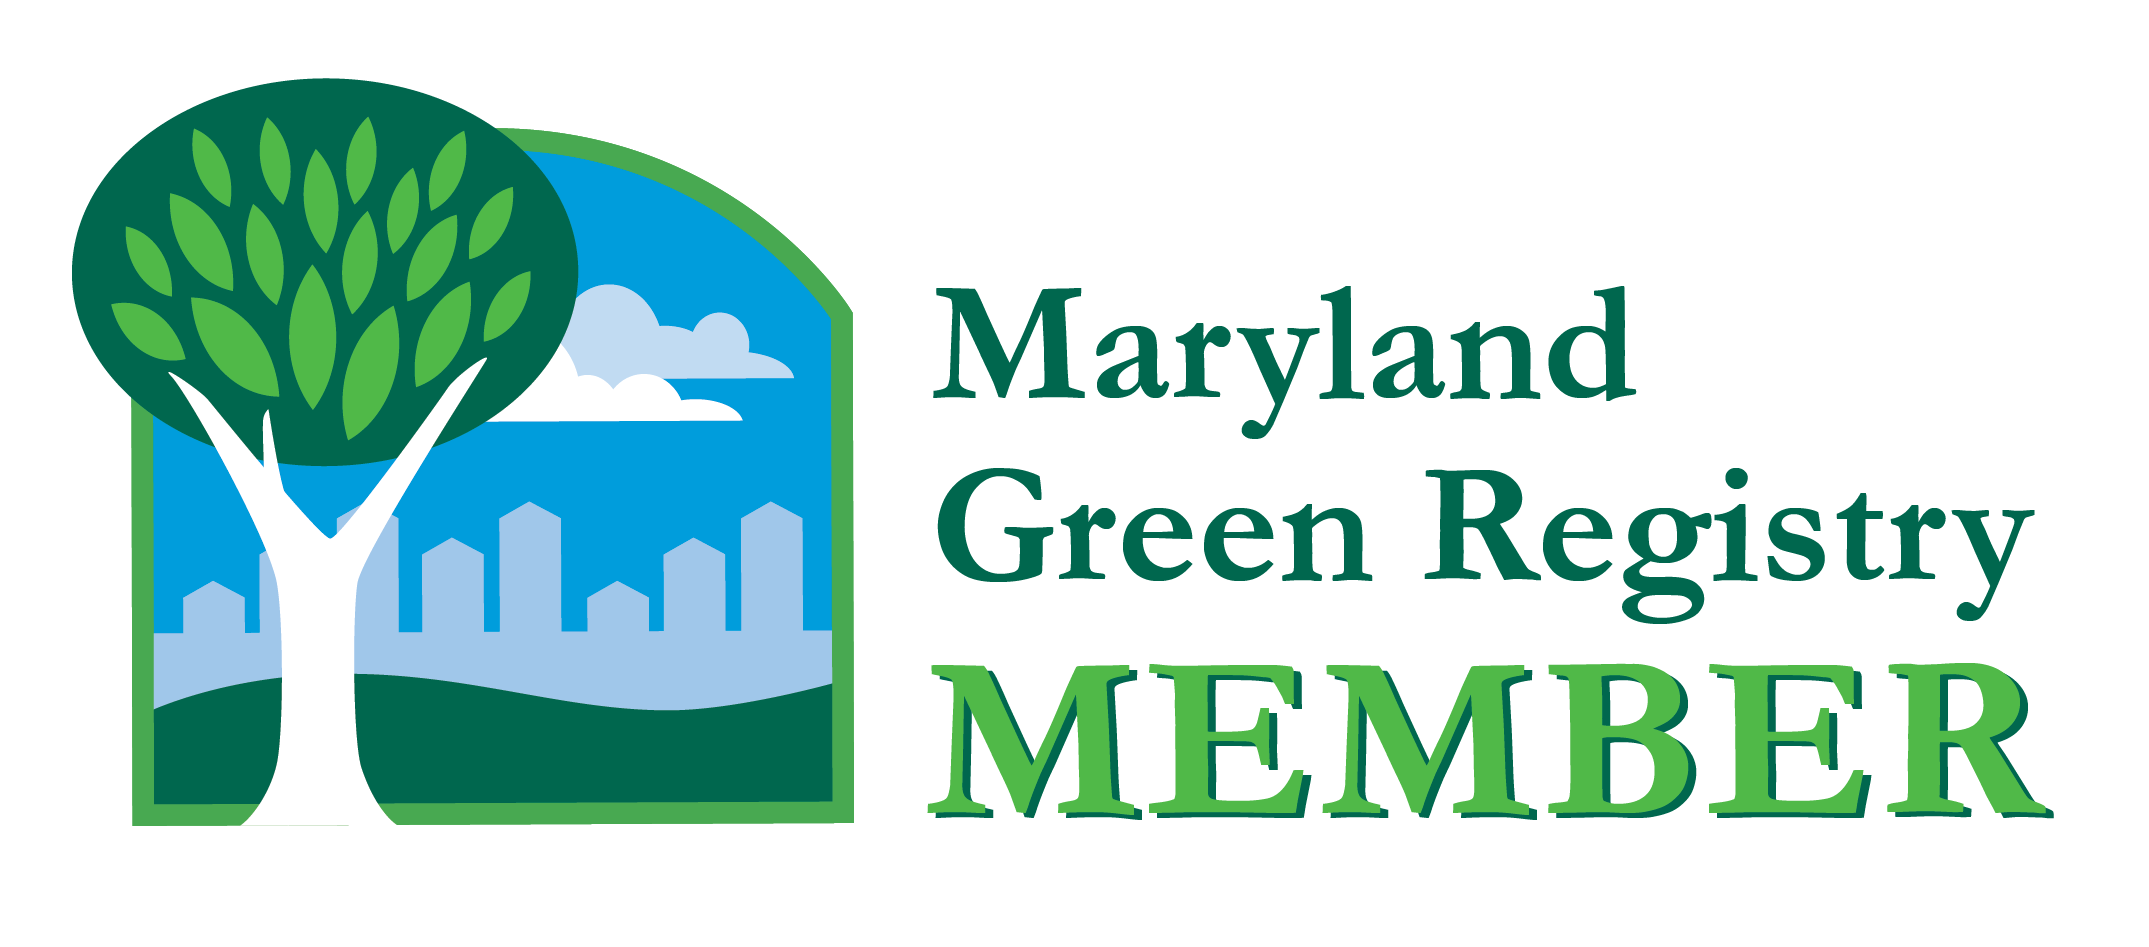 Green Initiatives of the Proy Law Firm as a Small Business - Green Law Firm - Green Businesses - Marylang Green Registry